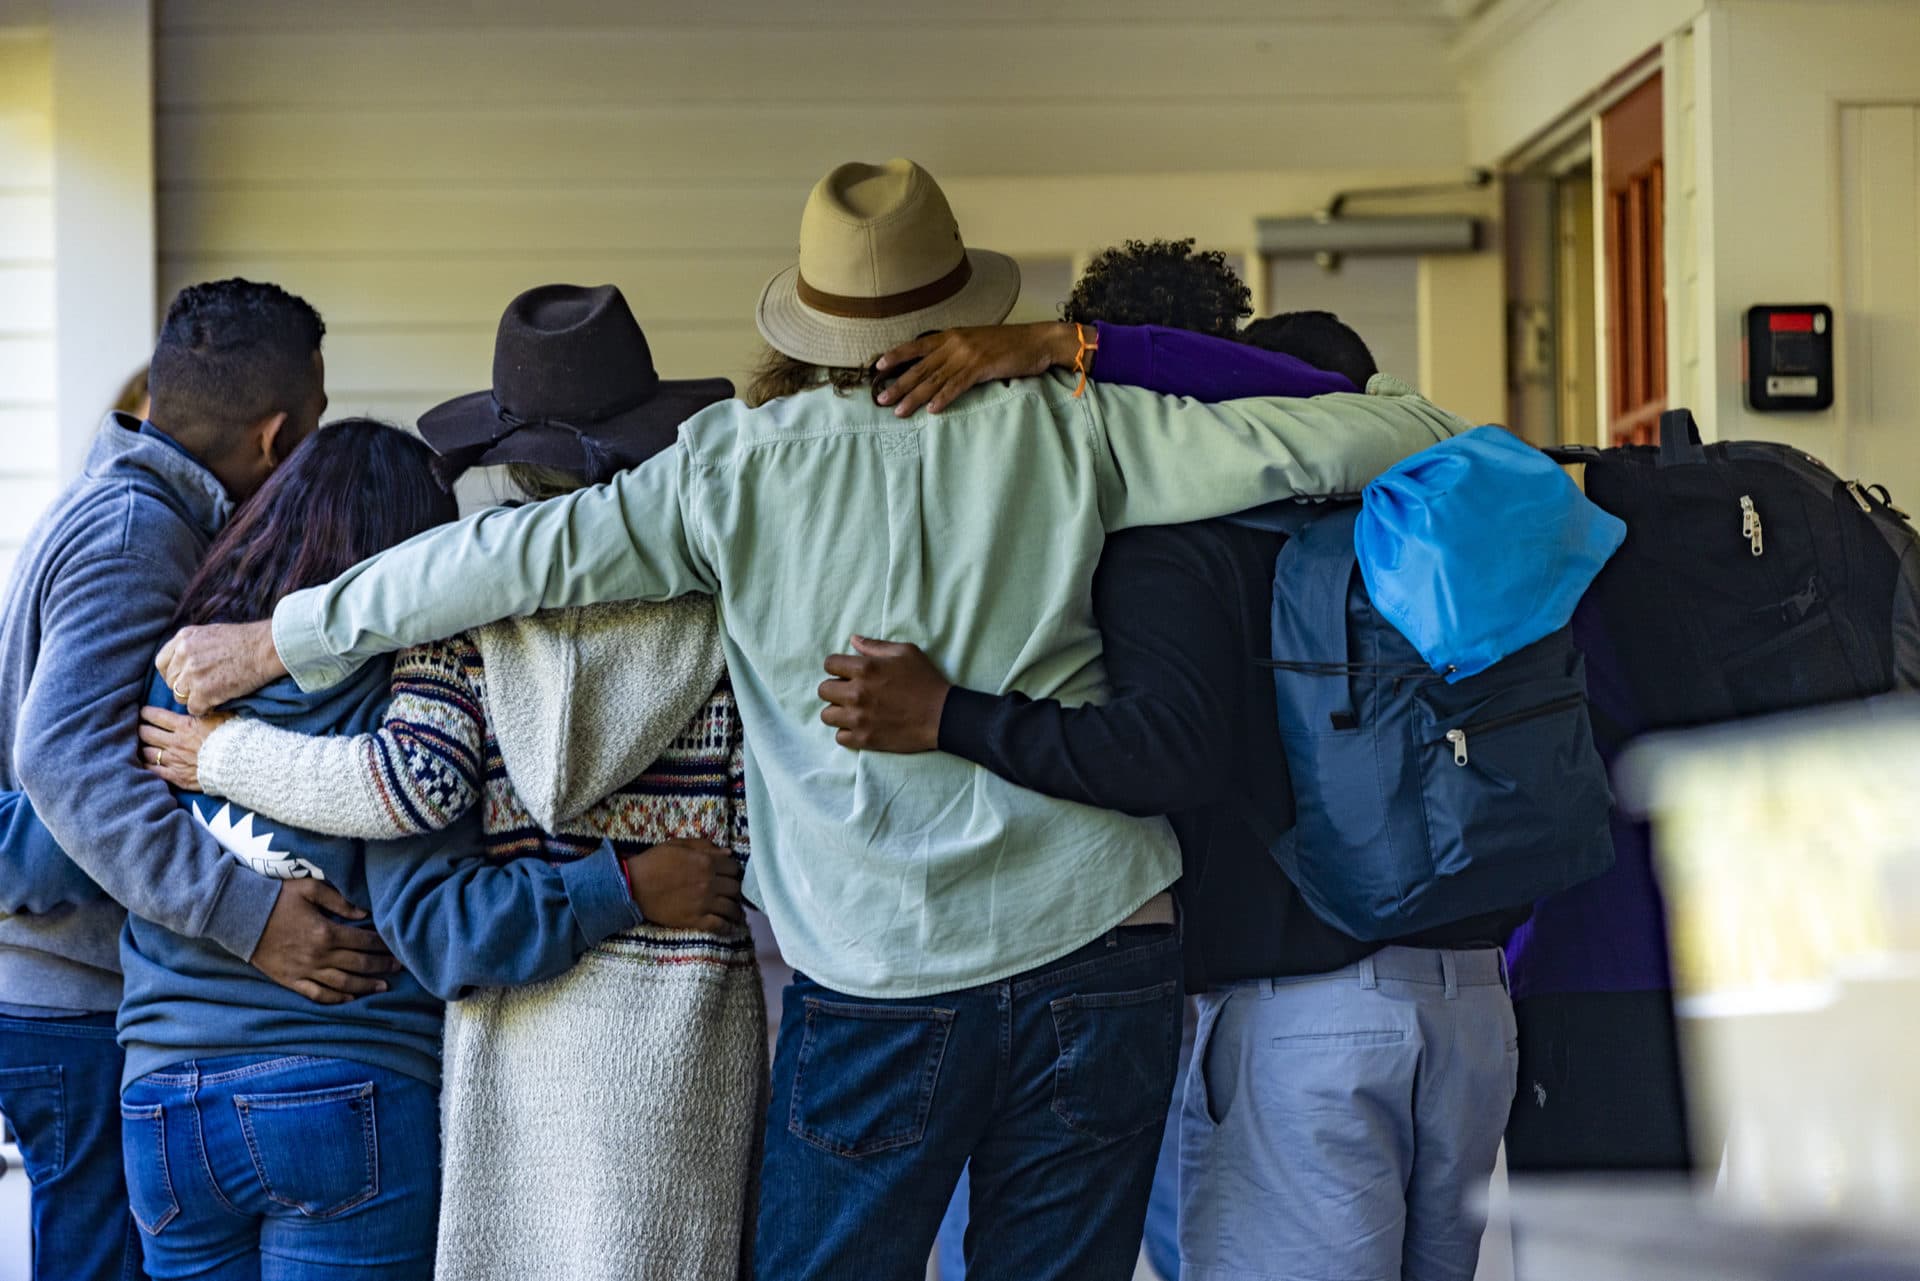 Immigrants and volunteers stand arm-in-arm in a huddle as the migrants depart St. Andrews Parish House in Edgartown. (Jesse Costa/WBUR)